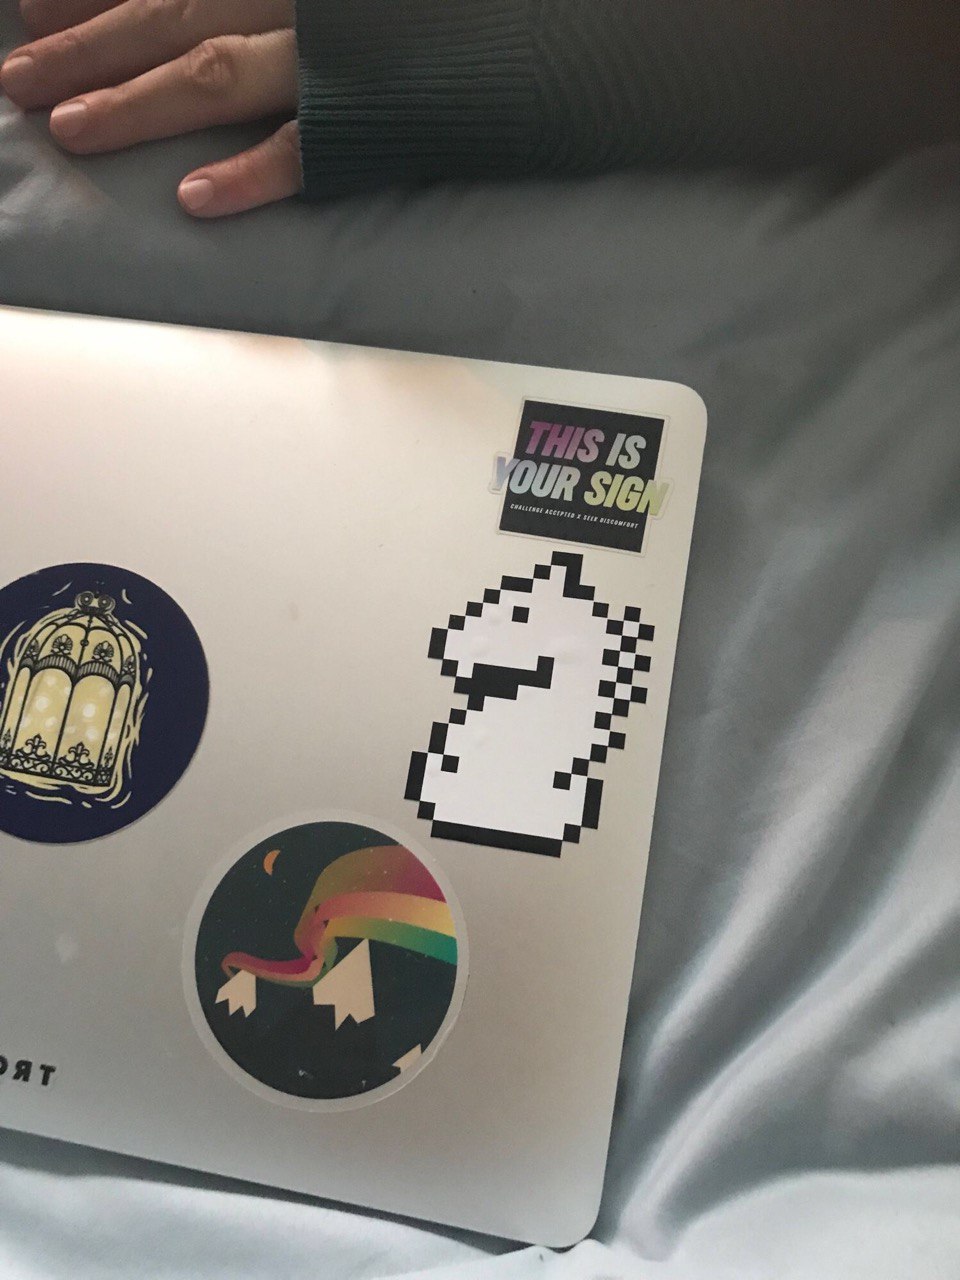 A laptop with multiple stickers, including one of the knight